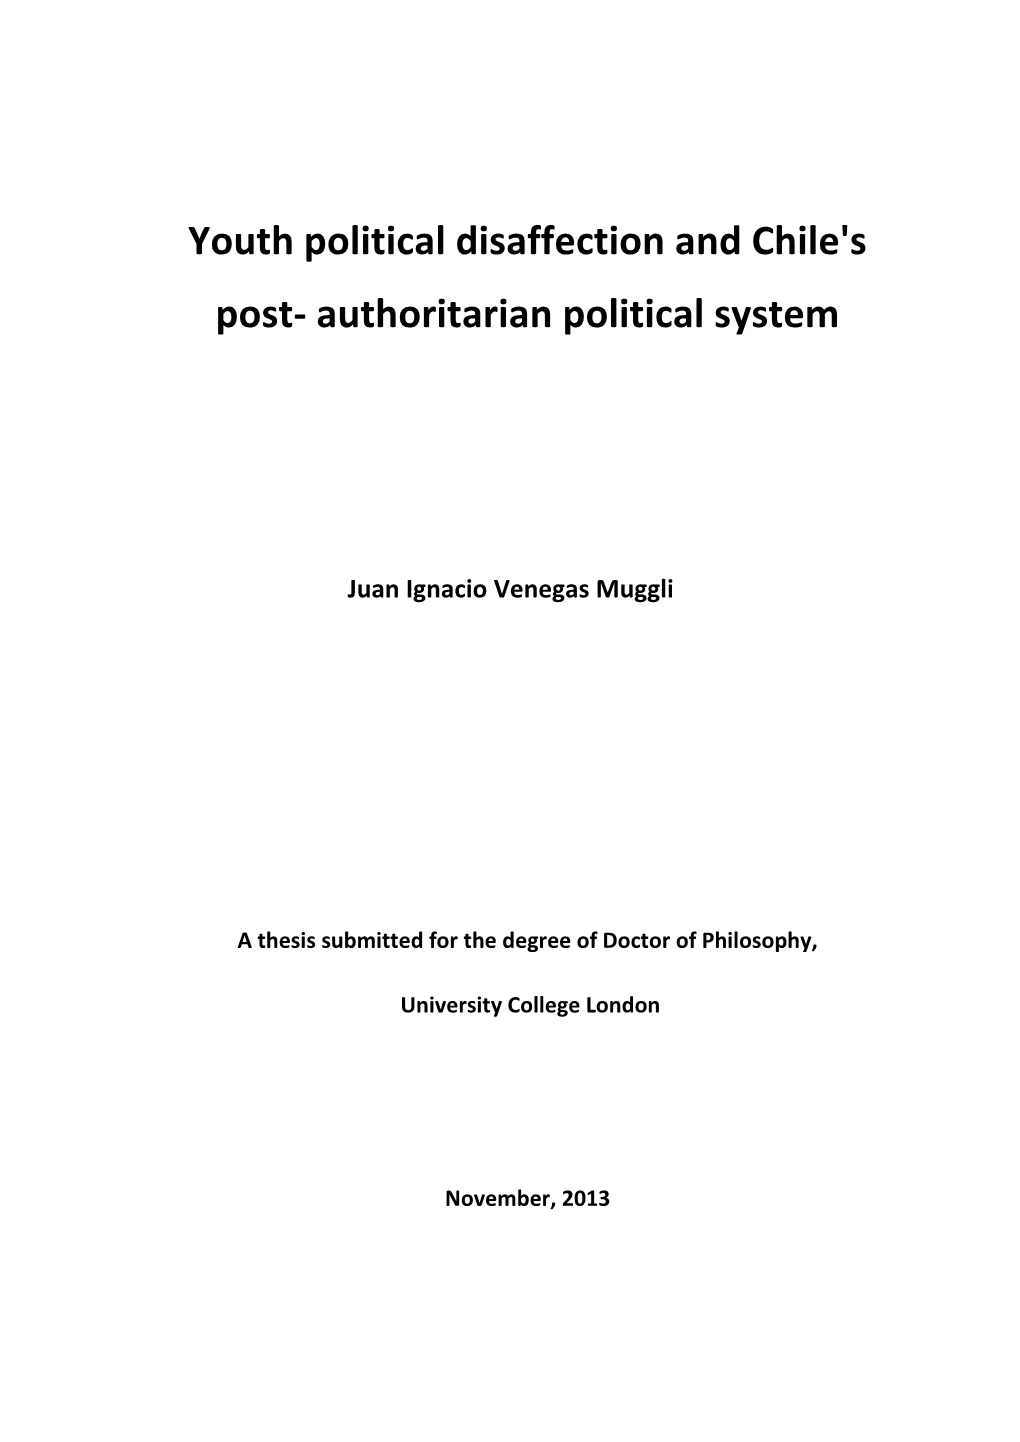 Youth Political Disaffection and Chile's Post Authoritarian Political System